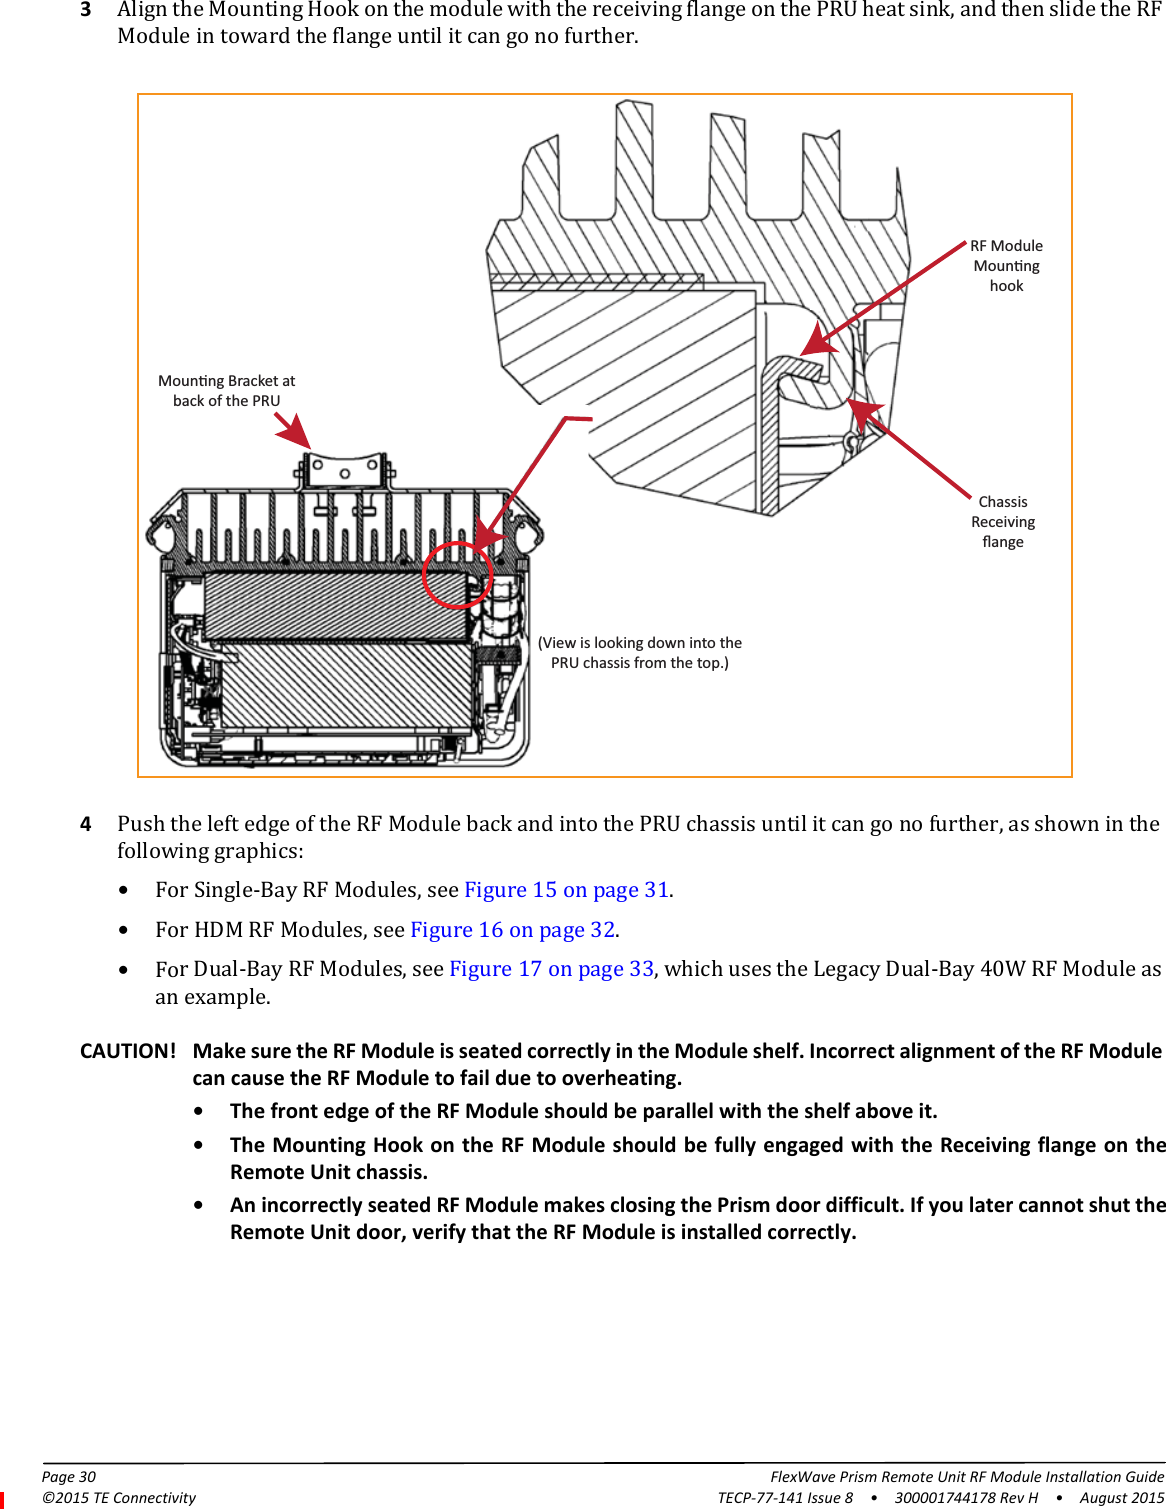 Page 30 FlexWave Prism Remote Unit RF Module Installation Guide©2015 TE Connectivity TECP-77-141 Issue 8  •  300001744178 Rev H  •  August 20153Align the Mounting Hook on the module with the receiving flange on the PRU heat sink, and then slide the RF Module in toward the flange until it can go no further.RF ModuleMounnghookChassisReceivingﬂangeMounng Bracket atback of the PRU(View is looking down into thePRU chassis from the top.)4Push the left edge of the RF Module back and into the PRU chassis until it can go no further, as shown in the following graphics:•For Single-Bay RF Modules, see Figure 15 on page 31.•For HDM RF Modules, see Figure 16 on page 32.•For Dual-Bay RF Modules, see Figure 17 on page 33, which uses the Legacy Dual-Bay 40W RF Module as an example.CAUTION! Make sure the RF Module is seated correctly in the Module shelf. Incorrect alignment of the RF Module can cause the RF Module to fail due to overheating. • The front edge of the RF Module should be parallel with the shelf above it.• The Mounting Hook on the RF Module should be fully engaged with the Receiving flange on the Remote Unit chassis.• An incorrectly seated RF Module makes closing the Prism door difficult. If you later cannot shut the Remote Unit door, verify that the RF Module is installed correctly.